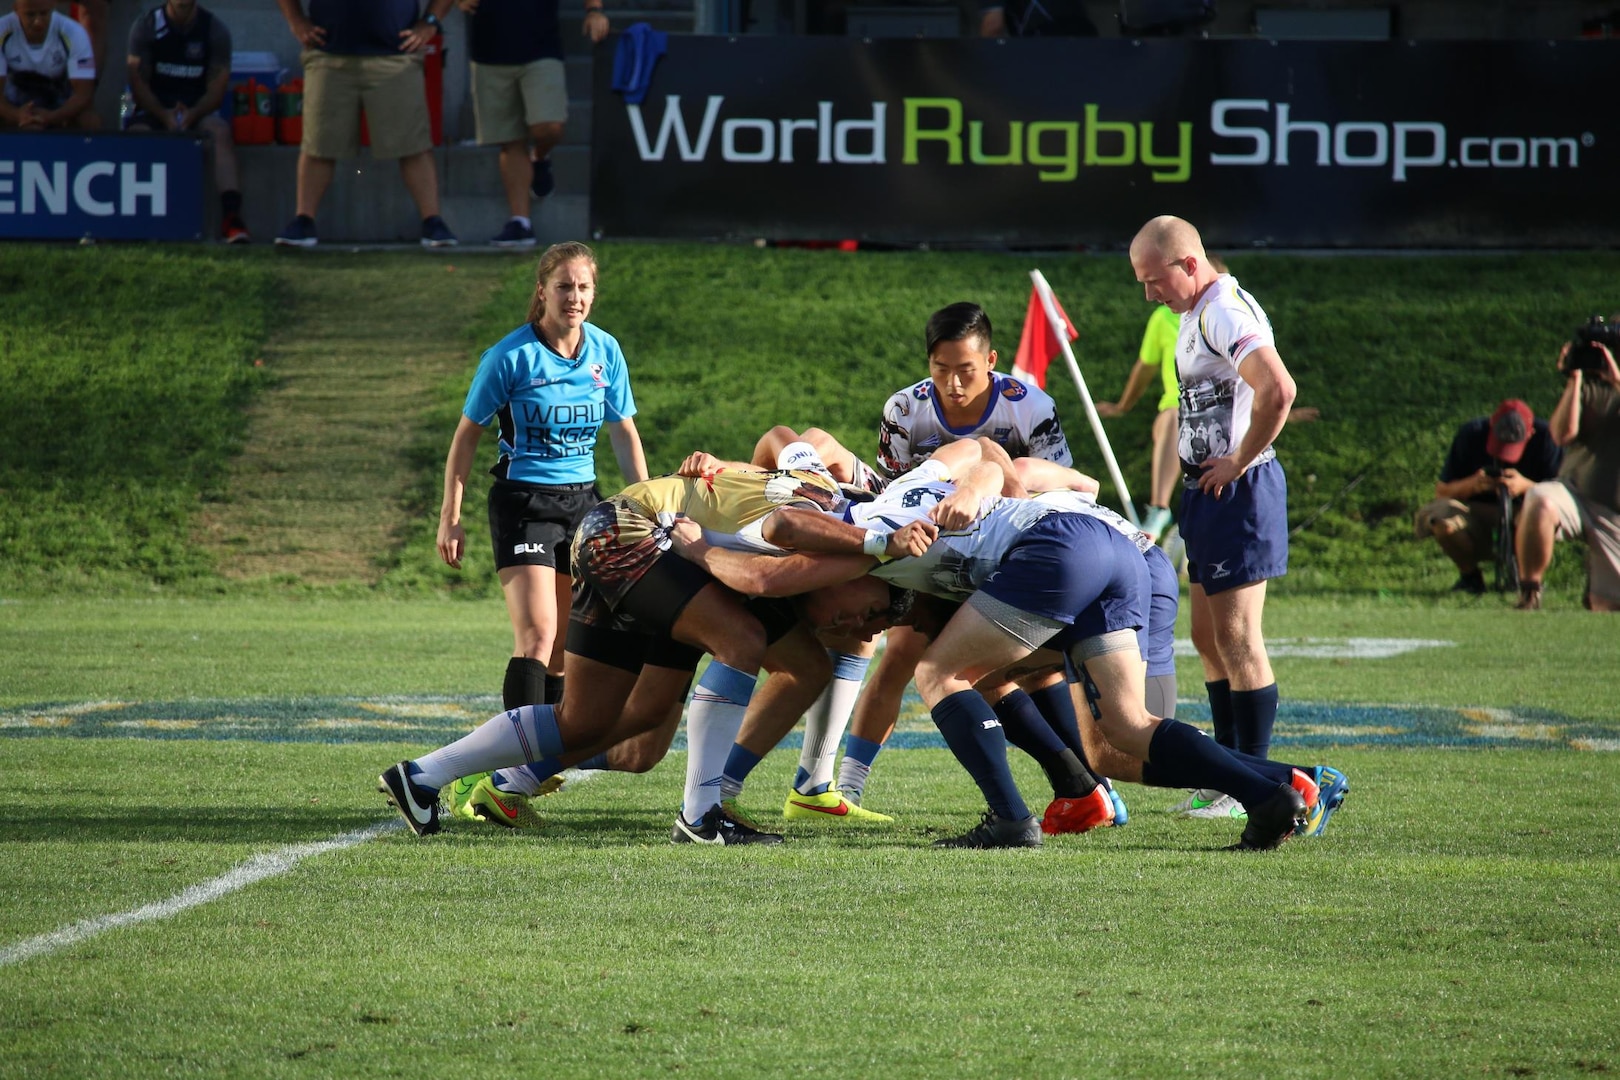 Scrum during the Air Force vs. Coast Guard Match. Air Force wins the contest 14-5.